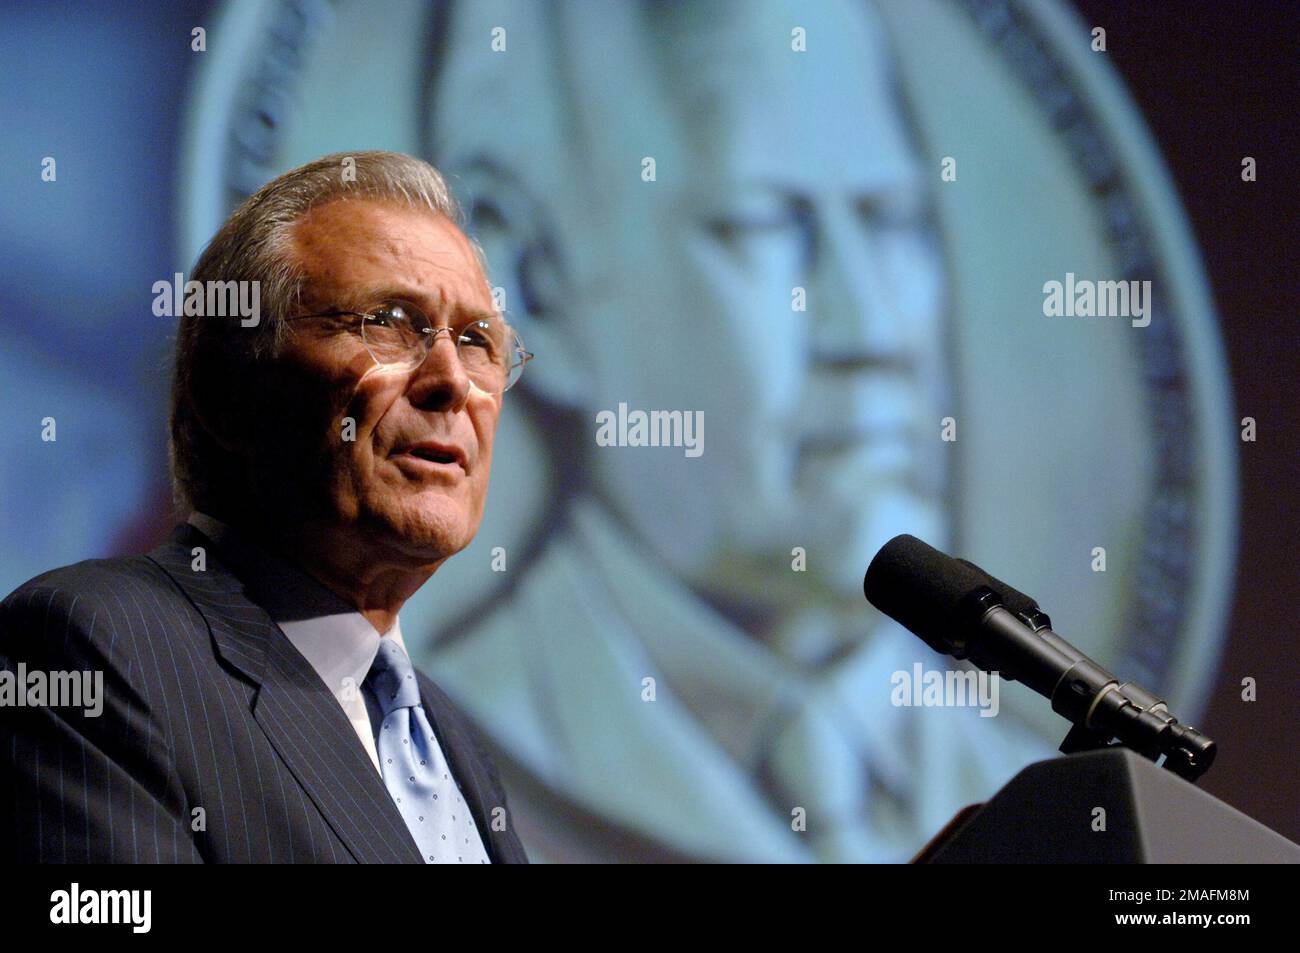 060619-N-0696M-396. [Complete] Scene Caption: The Honorable Donald H. Rumsfeld, U.S. Secretary of Defense, speaks during the presentation ceremony of the Gerald R. Ford medal for Distinguished Public Service held at the National Archives in Washington, District of Columbia, on June 19, 2006. This award is presented to five U.S. military service members, each representing their respective service, in recognition for their outstanding public contributions that reflect the qualities demonstrated by President Ford during his public service career. These qualities are: strength of character, integr Stock Photo